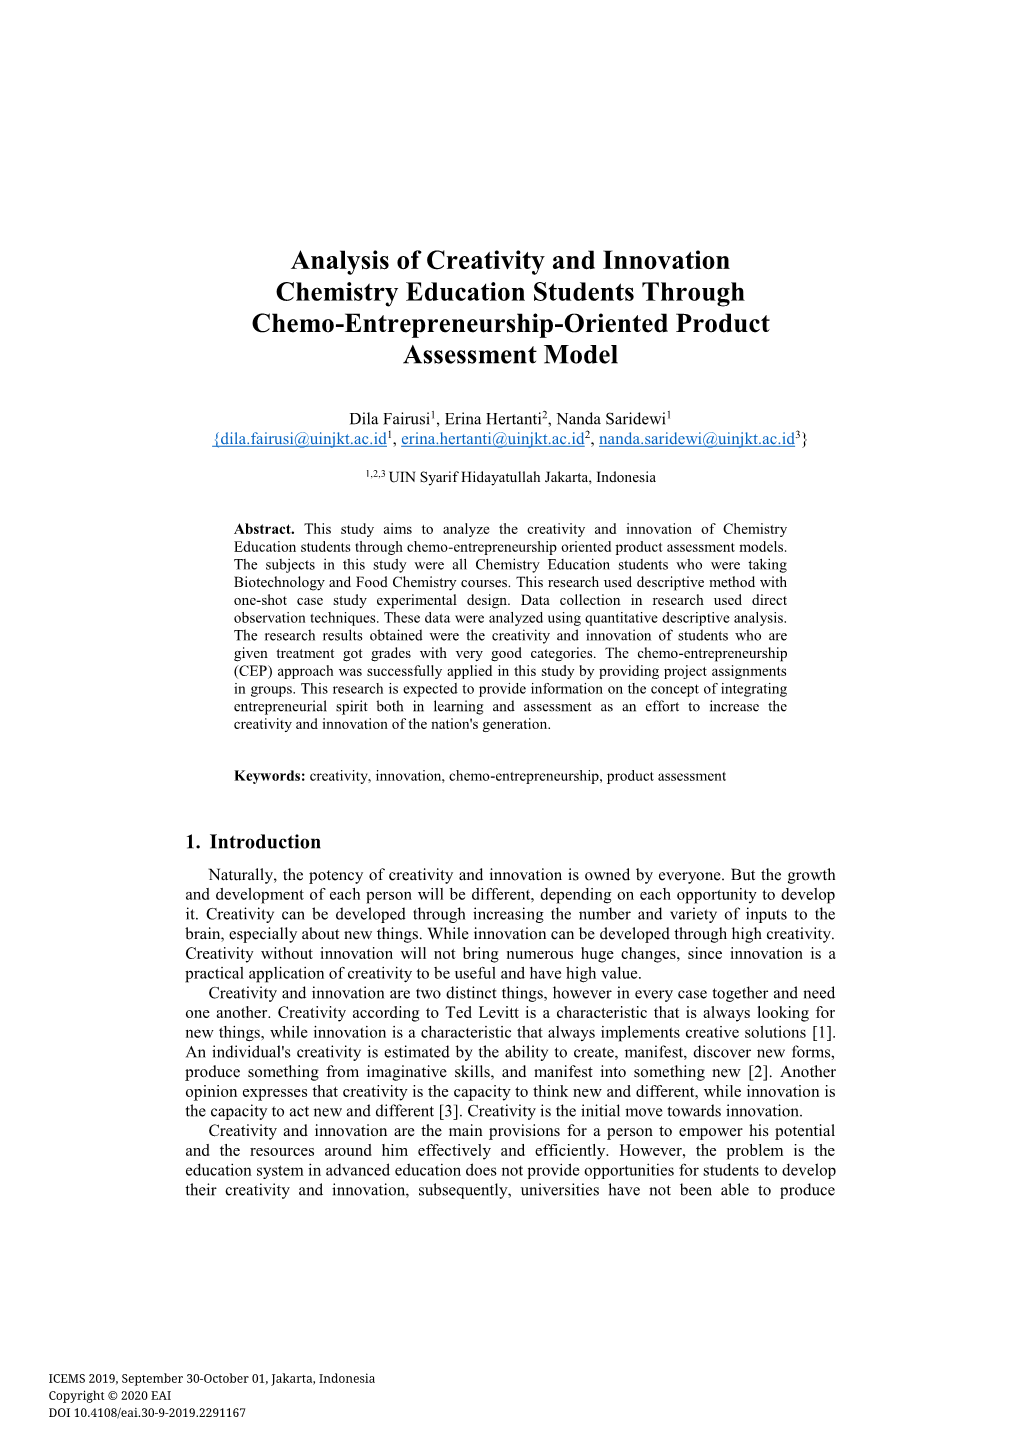 Analysis of Creativity and Innovation Chemistry Education Students Through Chemo-Entrepreneurship-Oriented Product Assessment Model